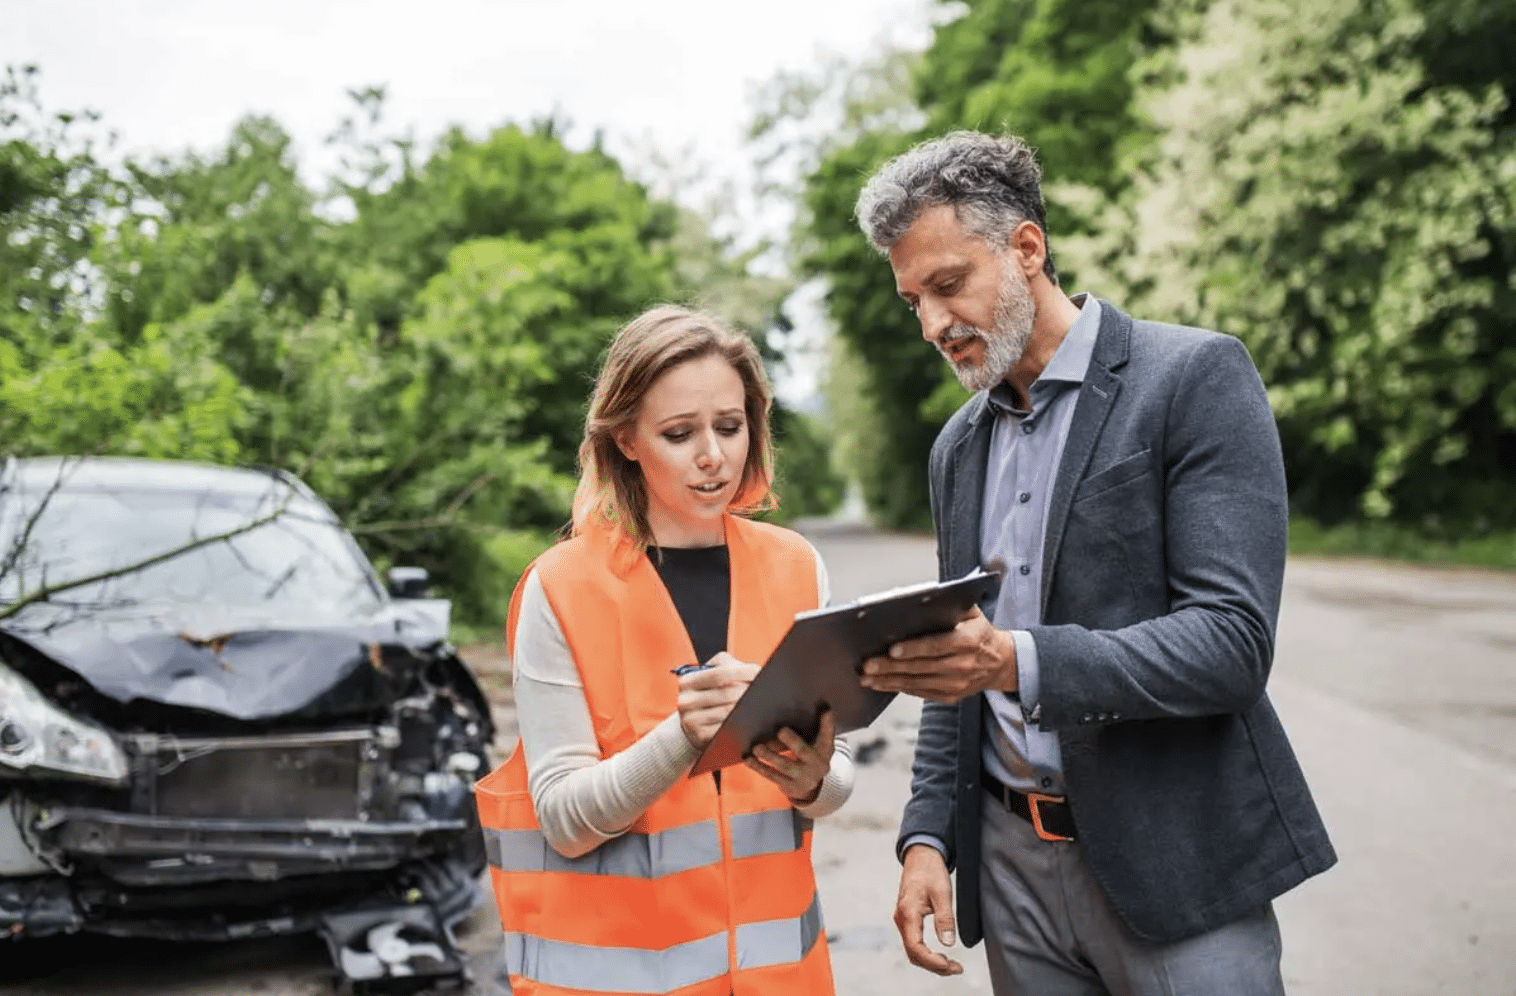 How to Avoid Car Scams and Frauds with These Top Tips